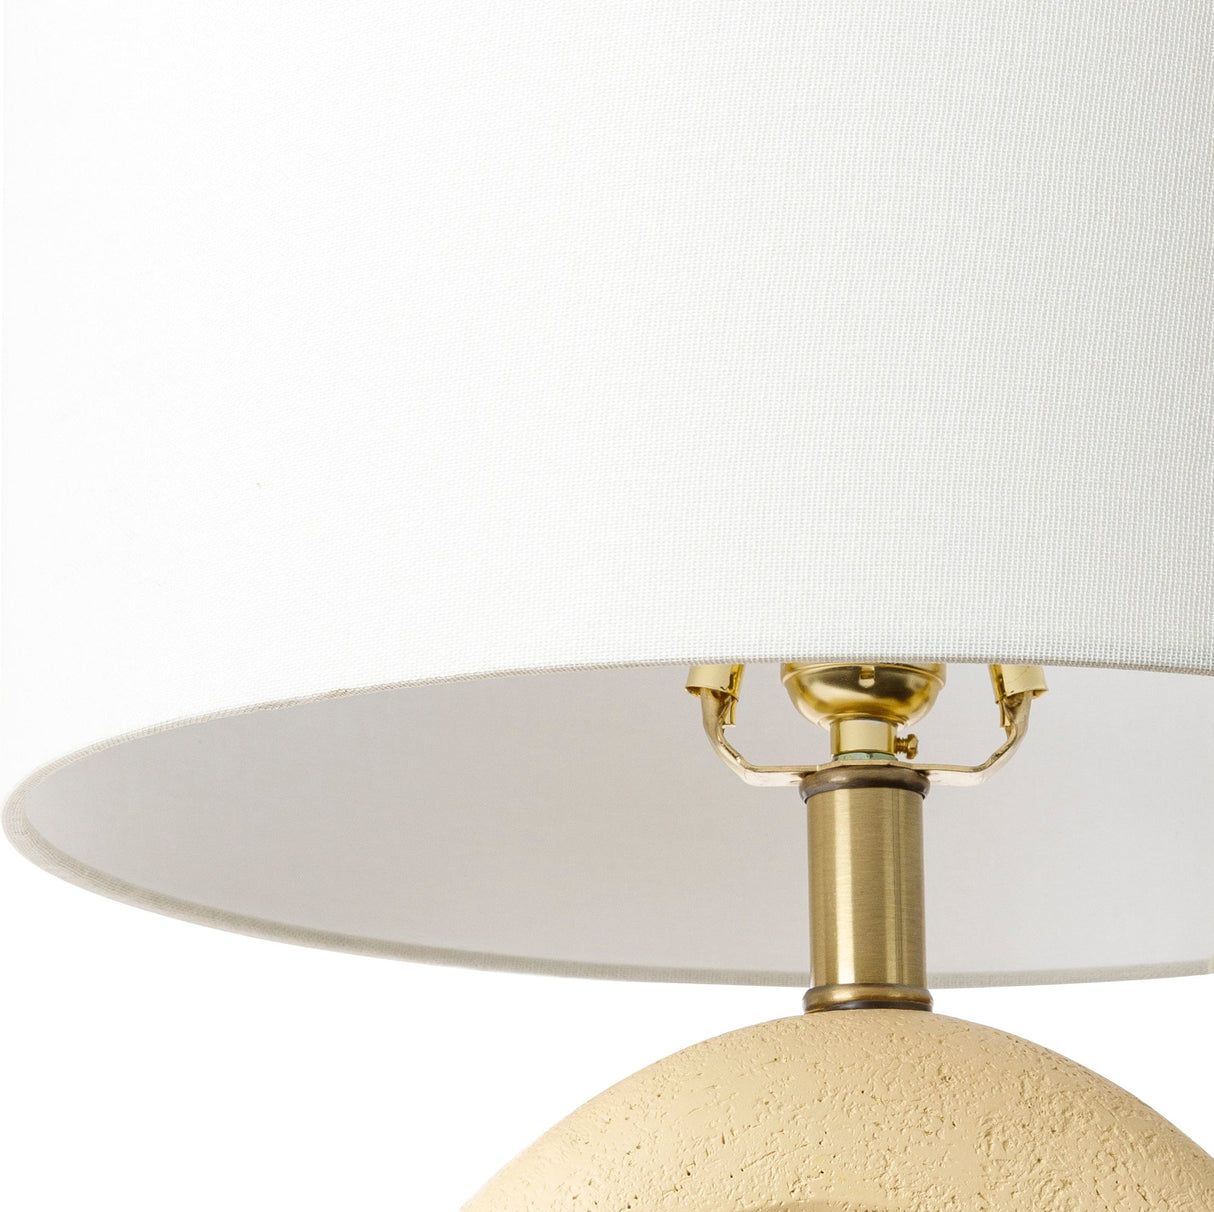 Lighting by BLU Ellory Lamp Table Lamps